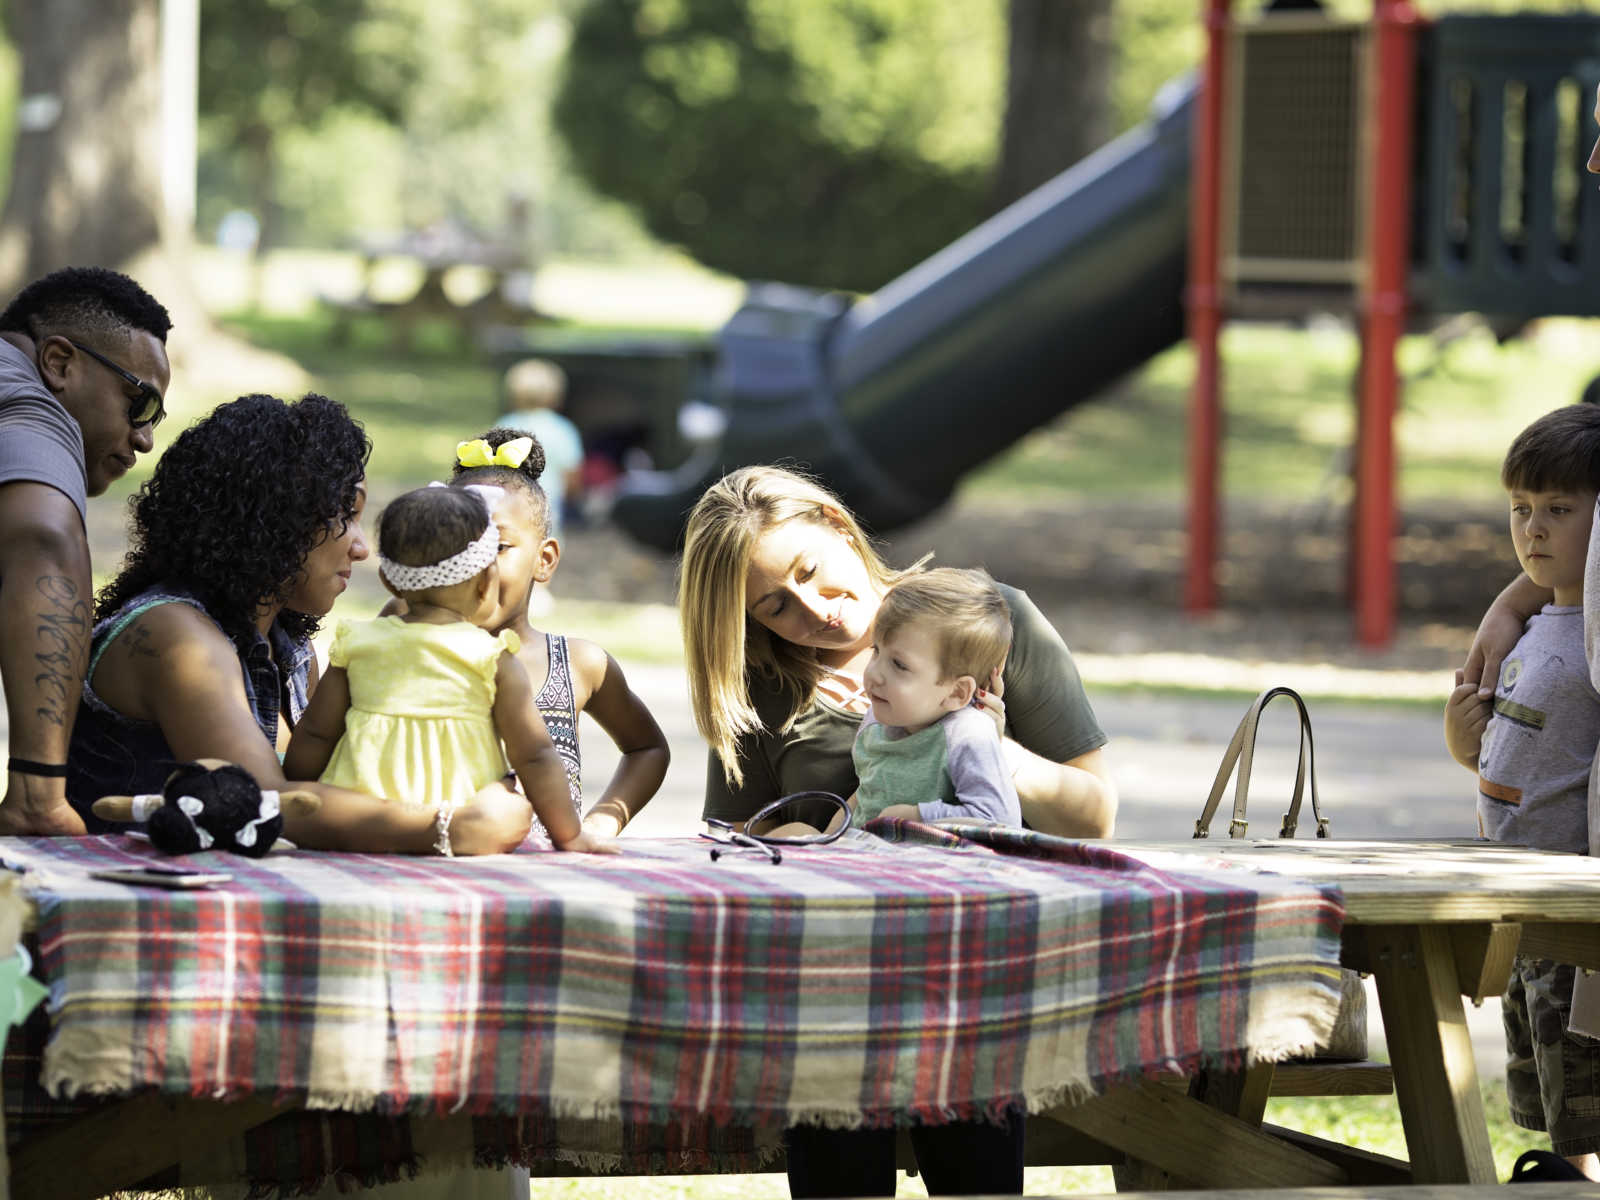 Two families sit at picnic table at playground